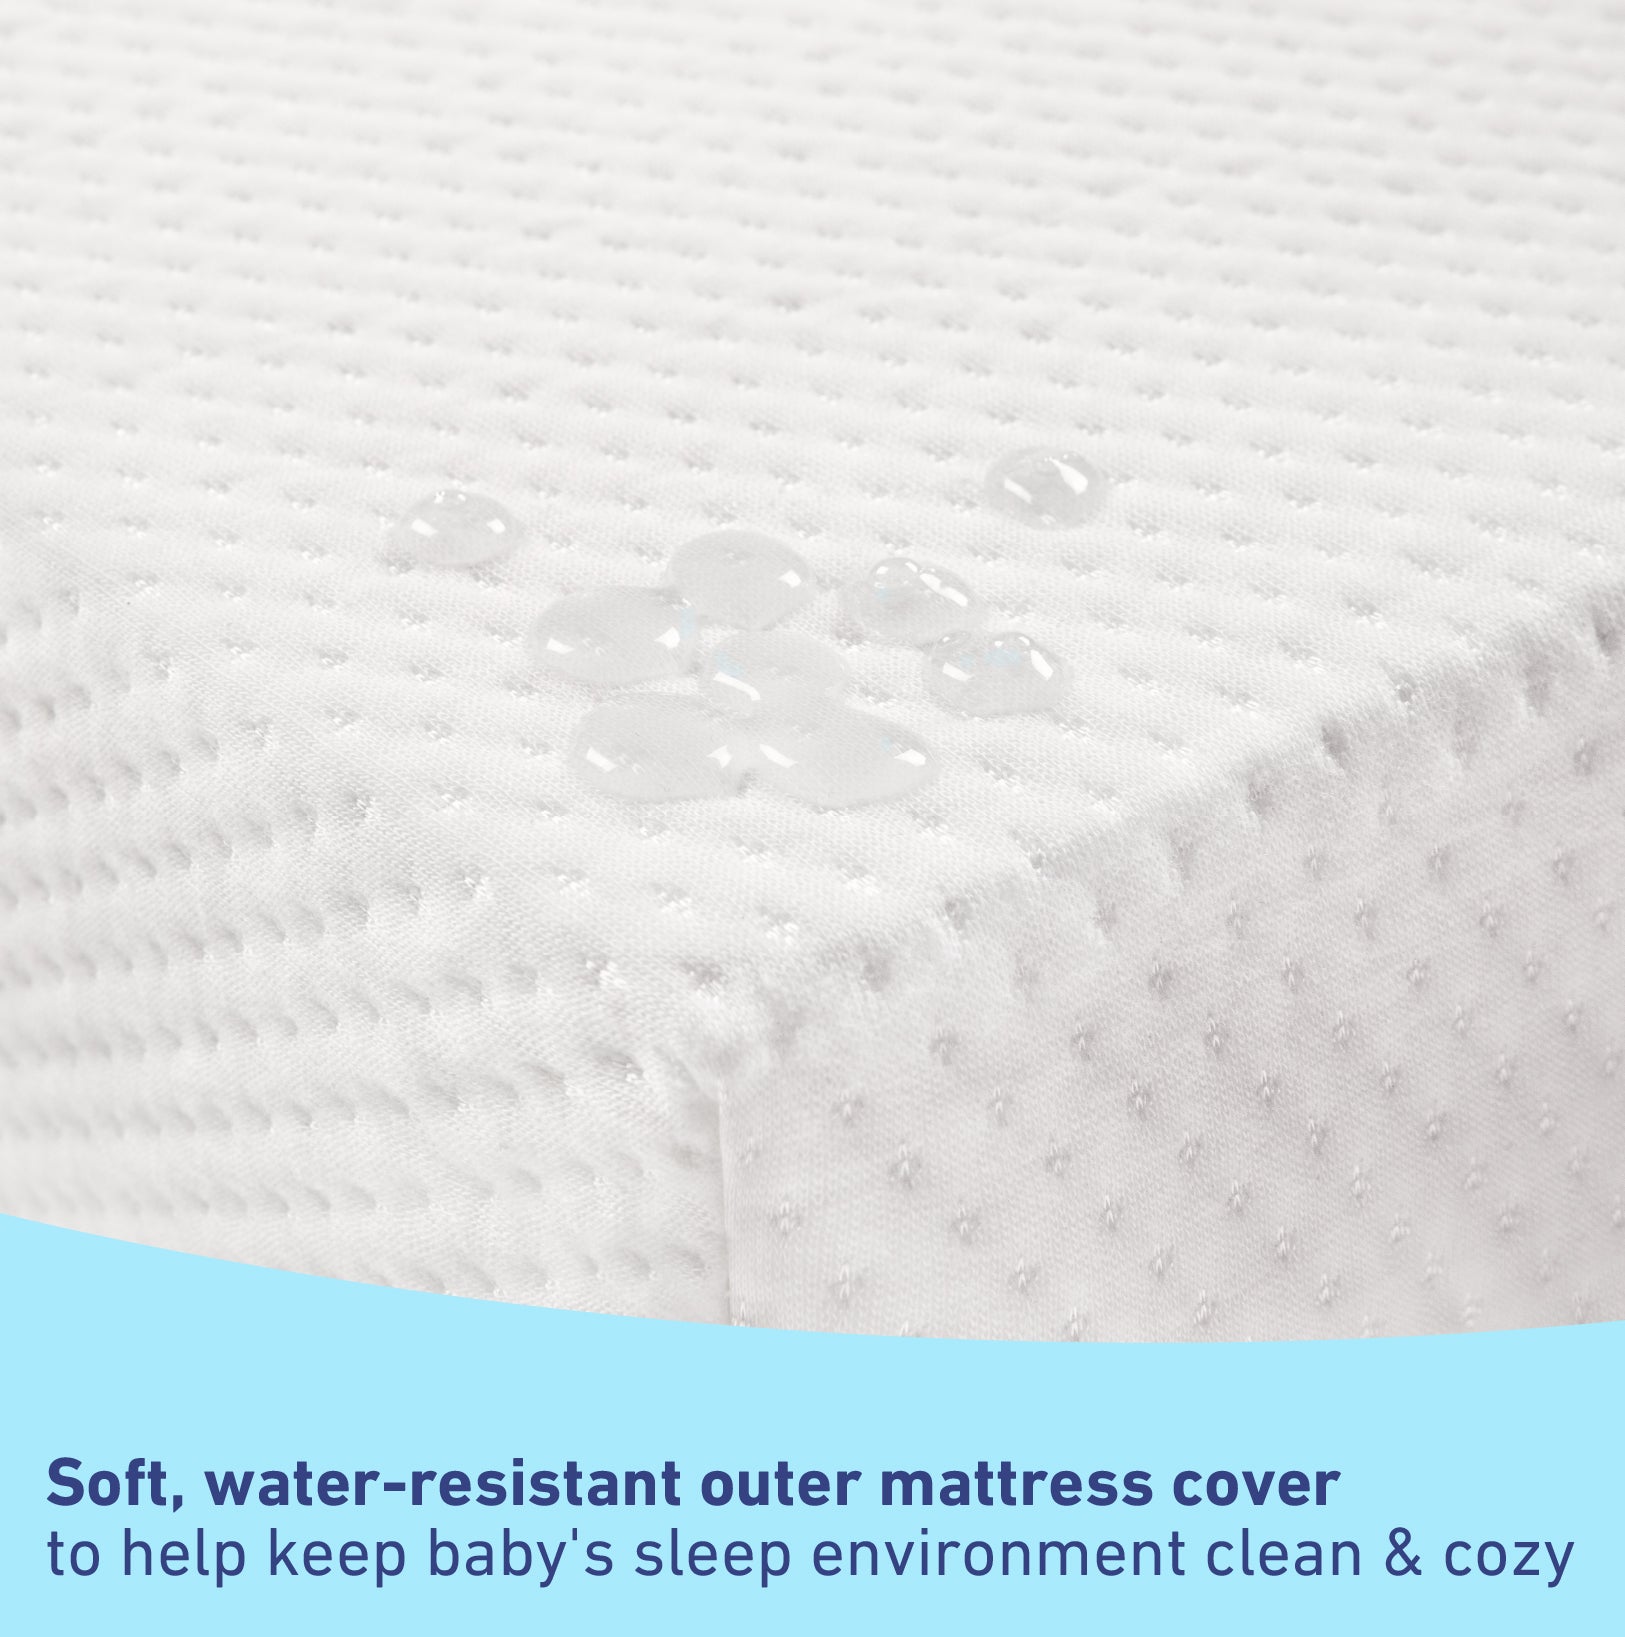 close-up view of water-resistant outer baby mattress cover